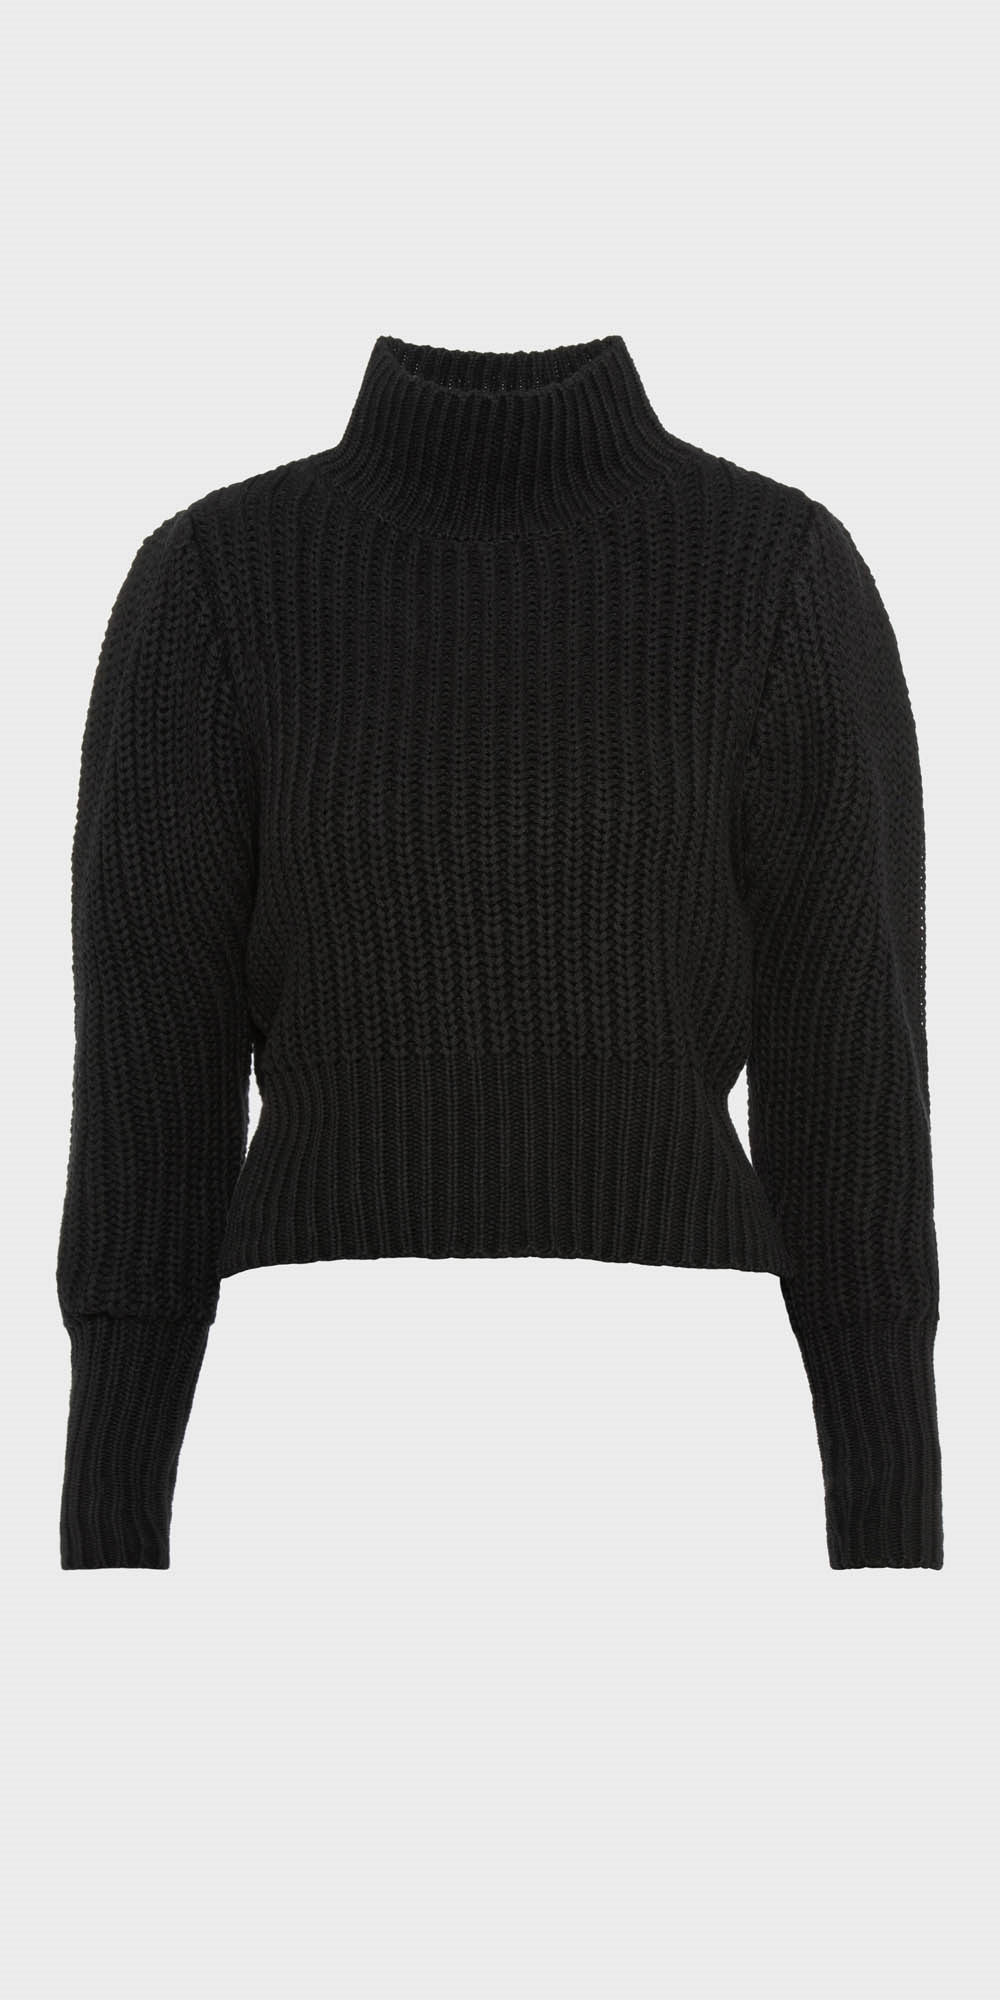 Chunky Textured Sweater | Buy Knitwear Online - Cue